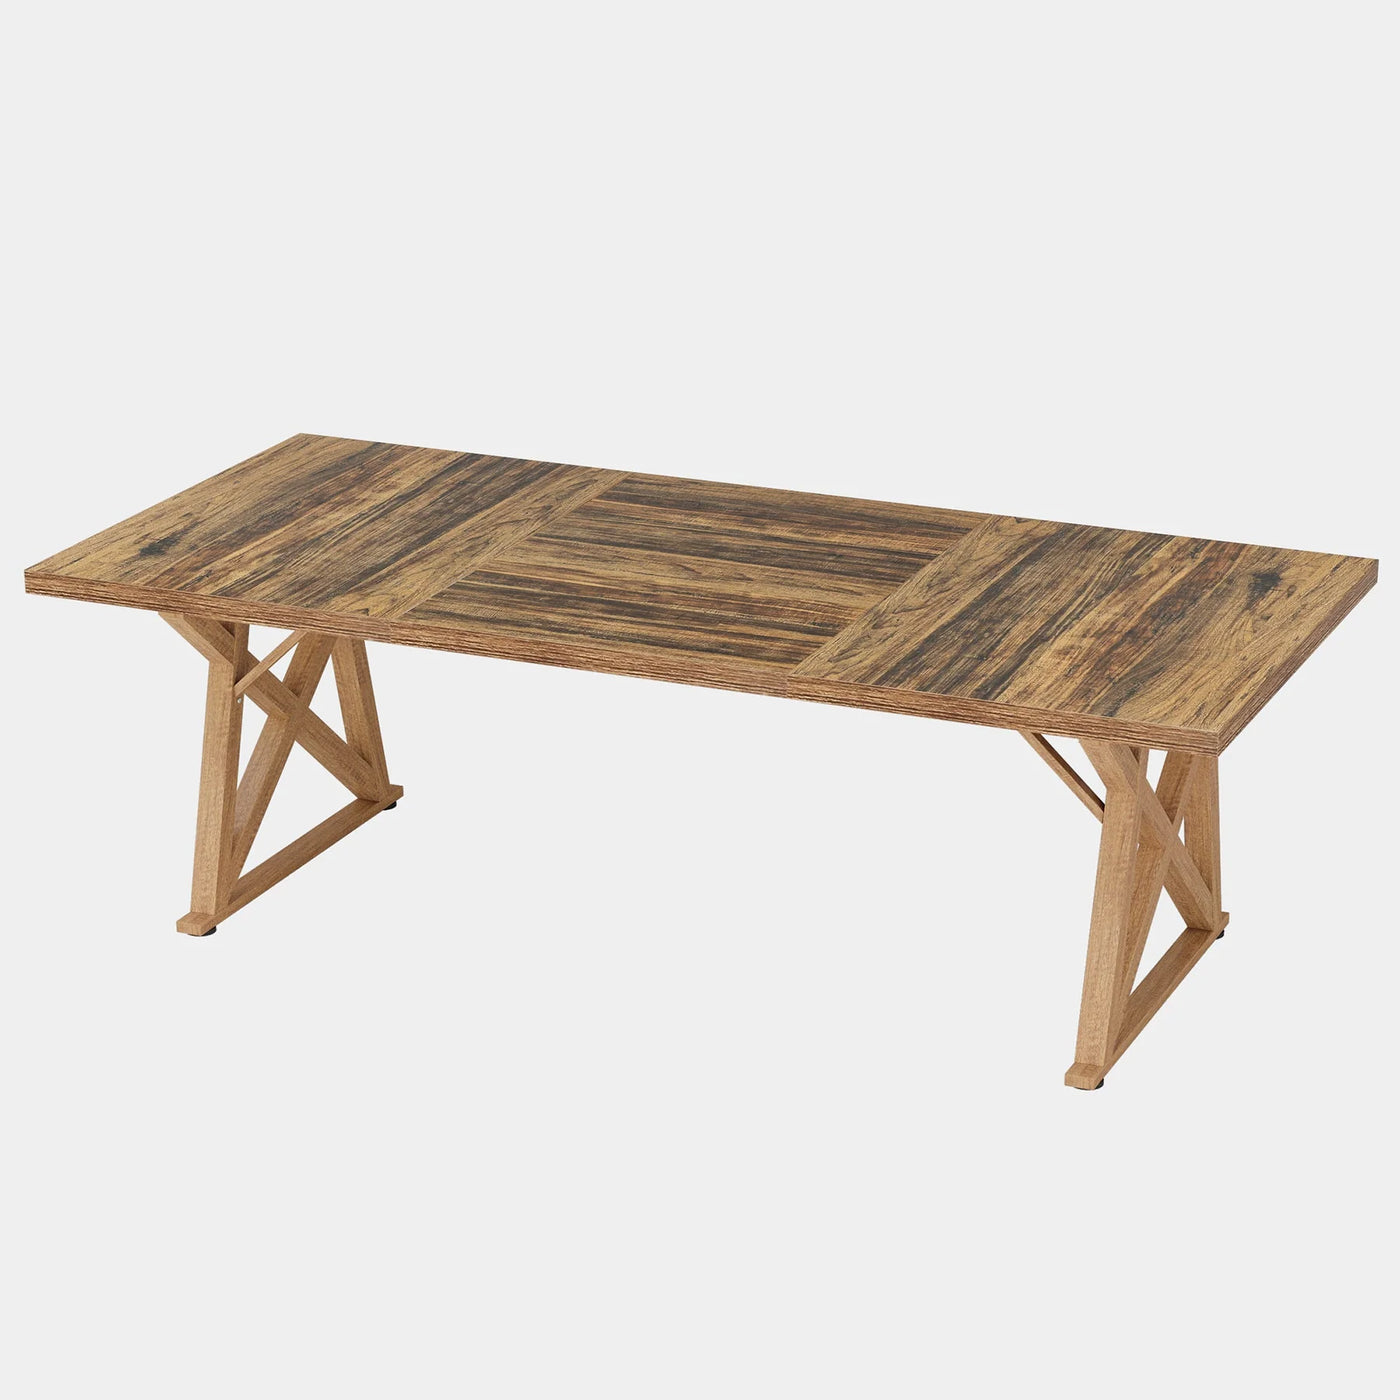 Chambre Wooden Dining Table | 71" Rectangular Kitchen Dinner Table for 6 to 8 People